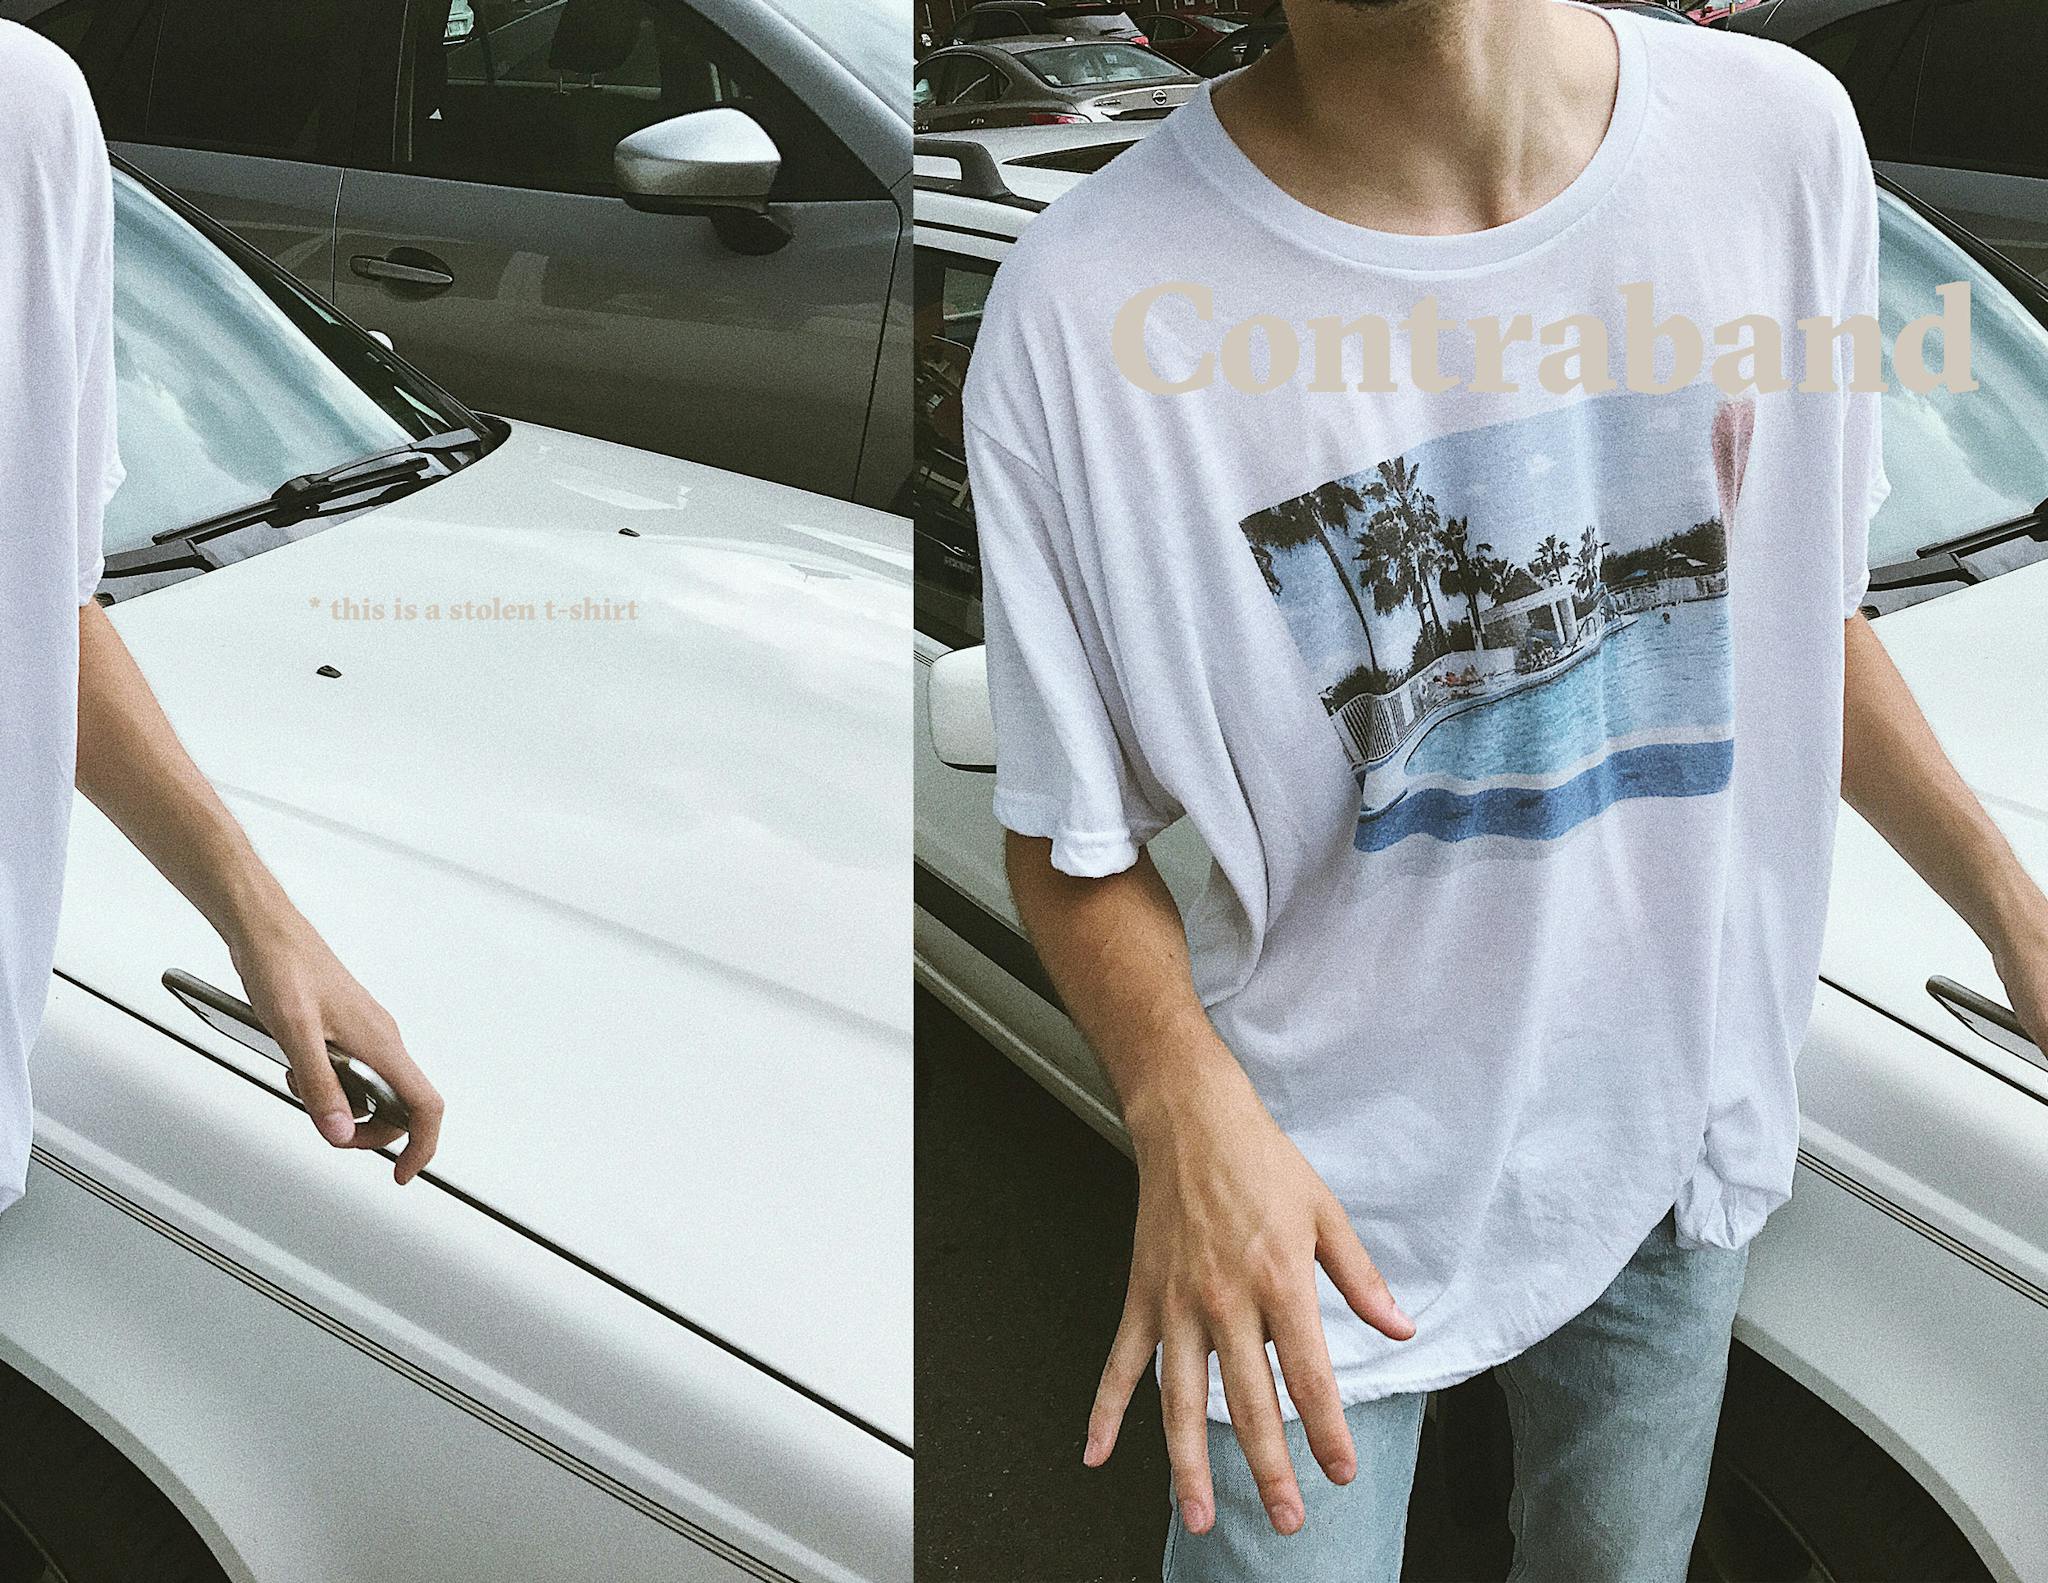 Two side-by-side photographs join together to make one image, with small text saying "this is a stolen t-shirt" on the left side and larger text saying "Contraband" on the right. A white car is in the background of both images, with a person wearing a t-shirt in the foreground. The person is on the edge of the frame in the image to the left, and at the center of the frame in the image to the right.